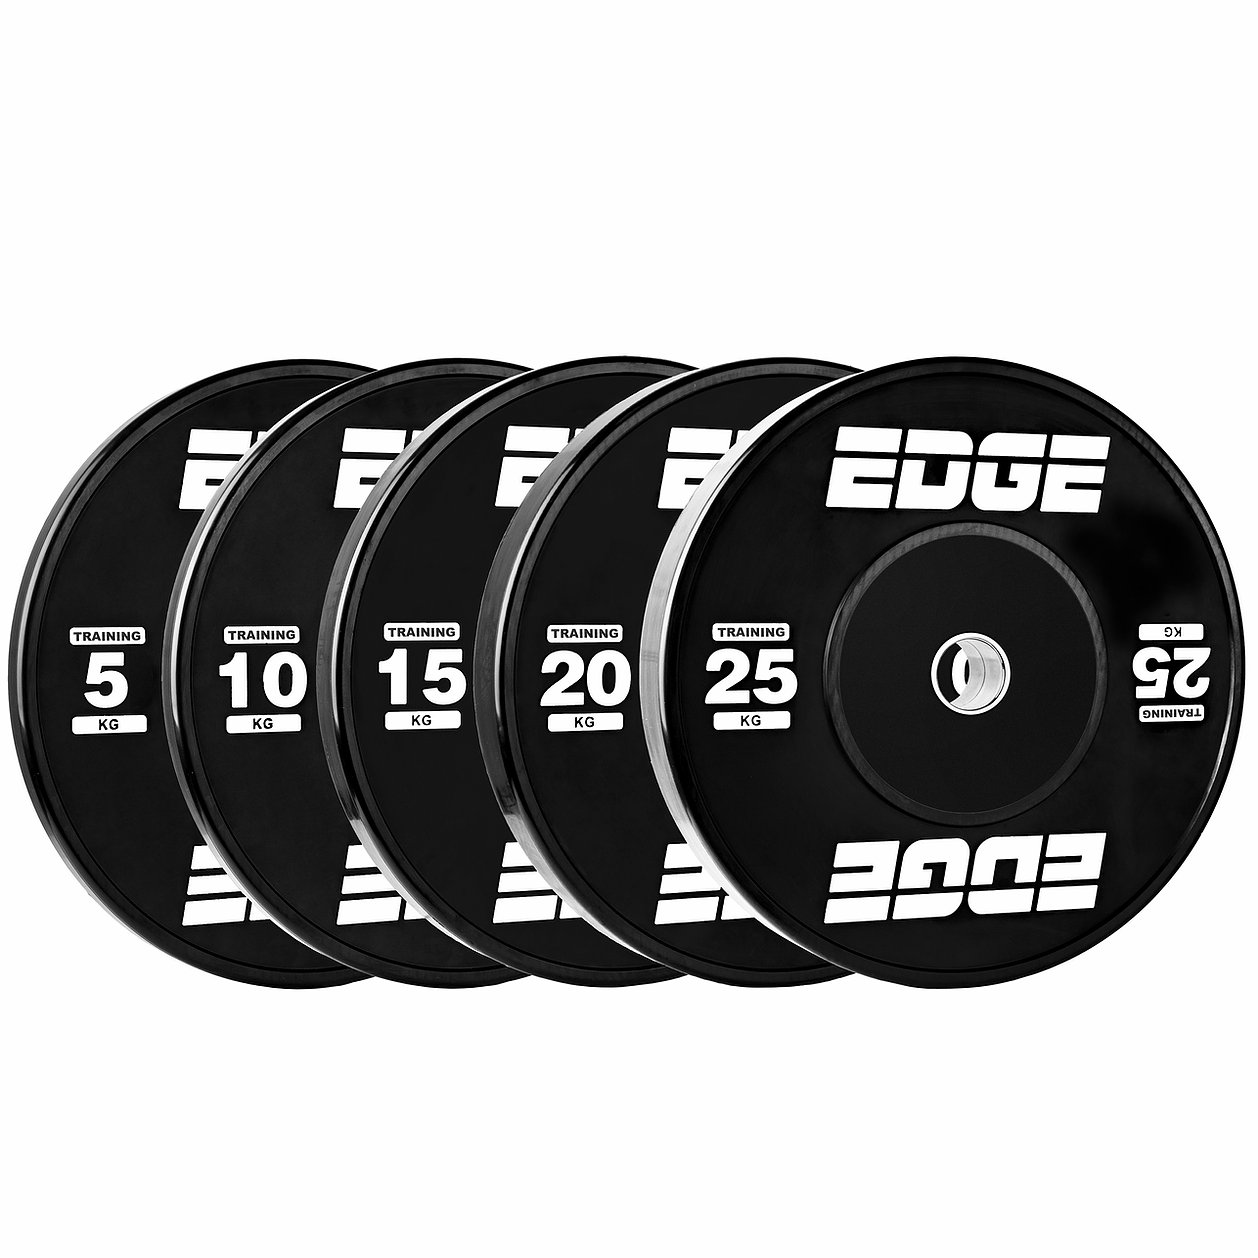 Plate Bumper Black Eco Weightlifting Plate Paird (10Kg x 2)